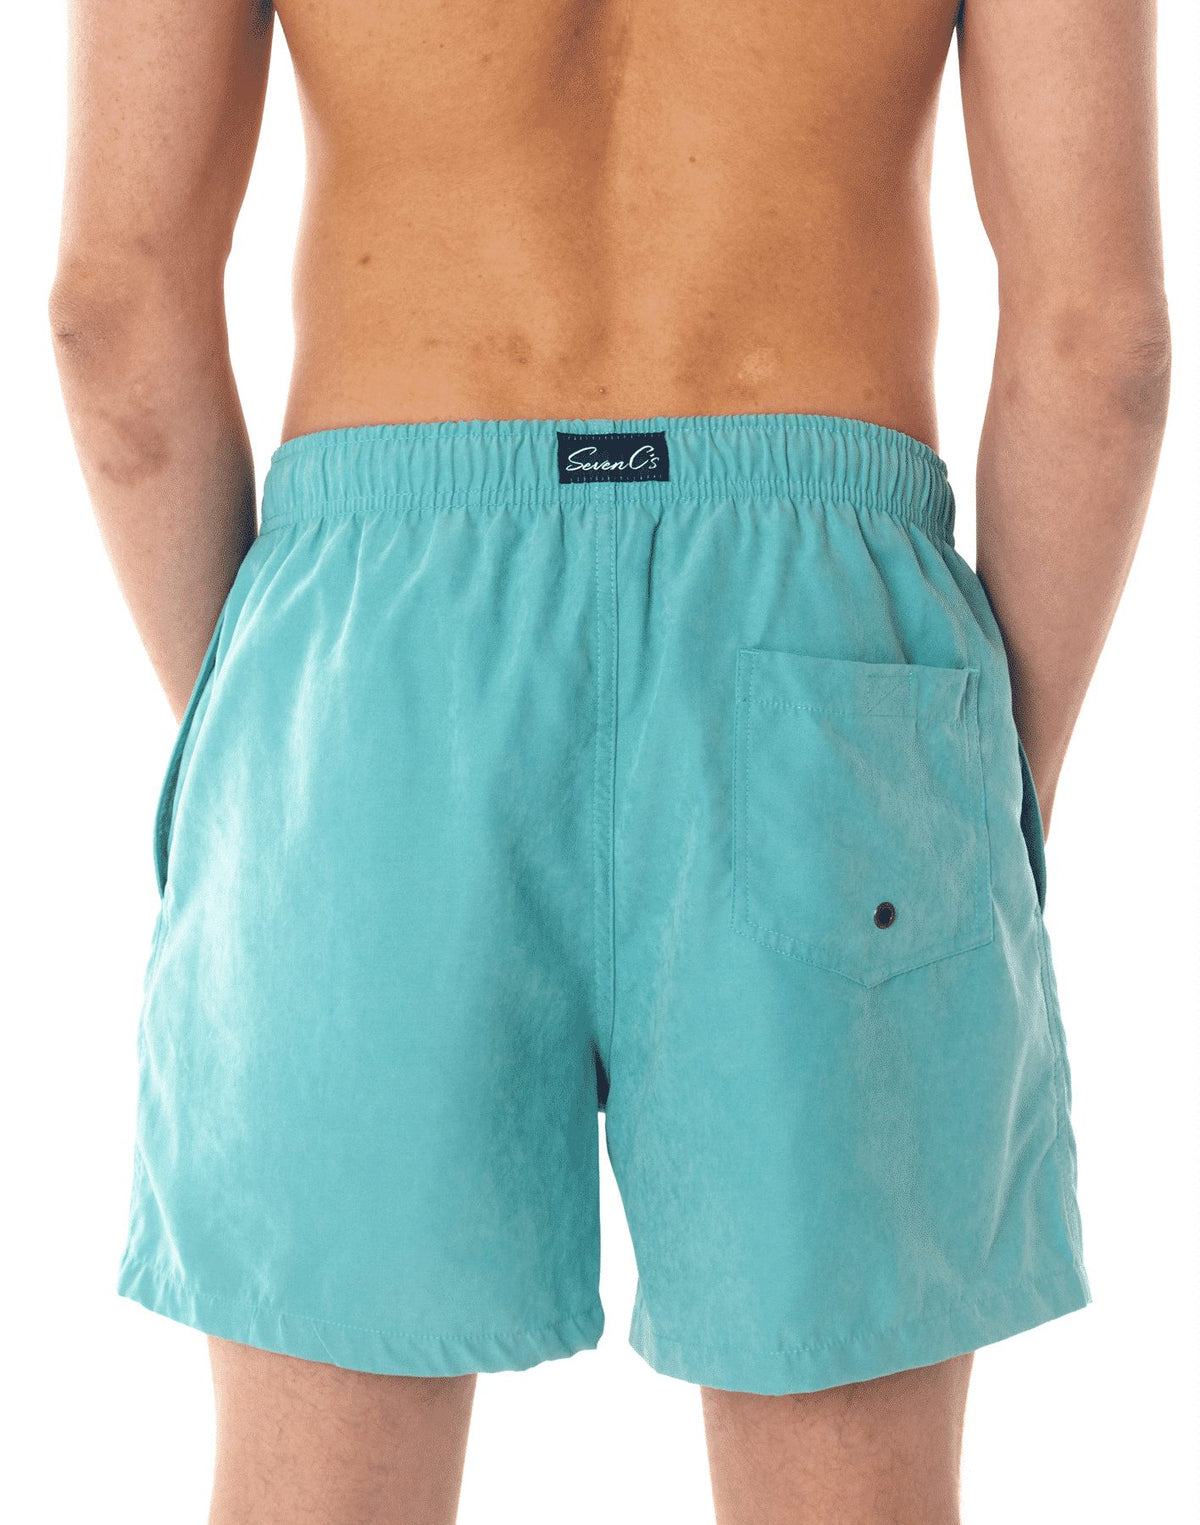 SevenC's Men's Recycled Polyester Shorts in Blue - Back View